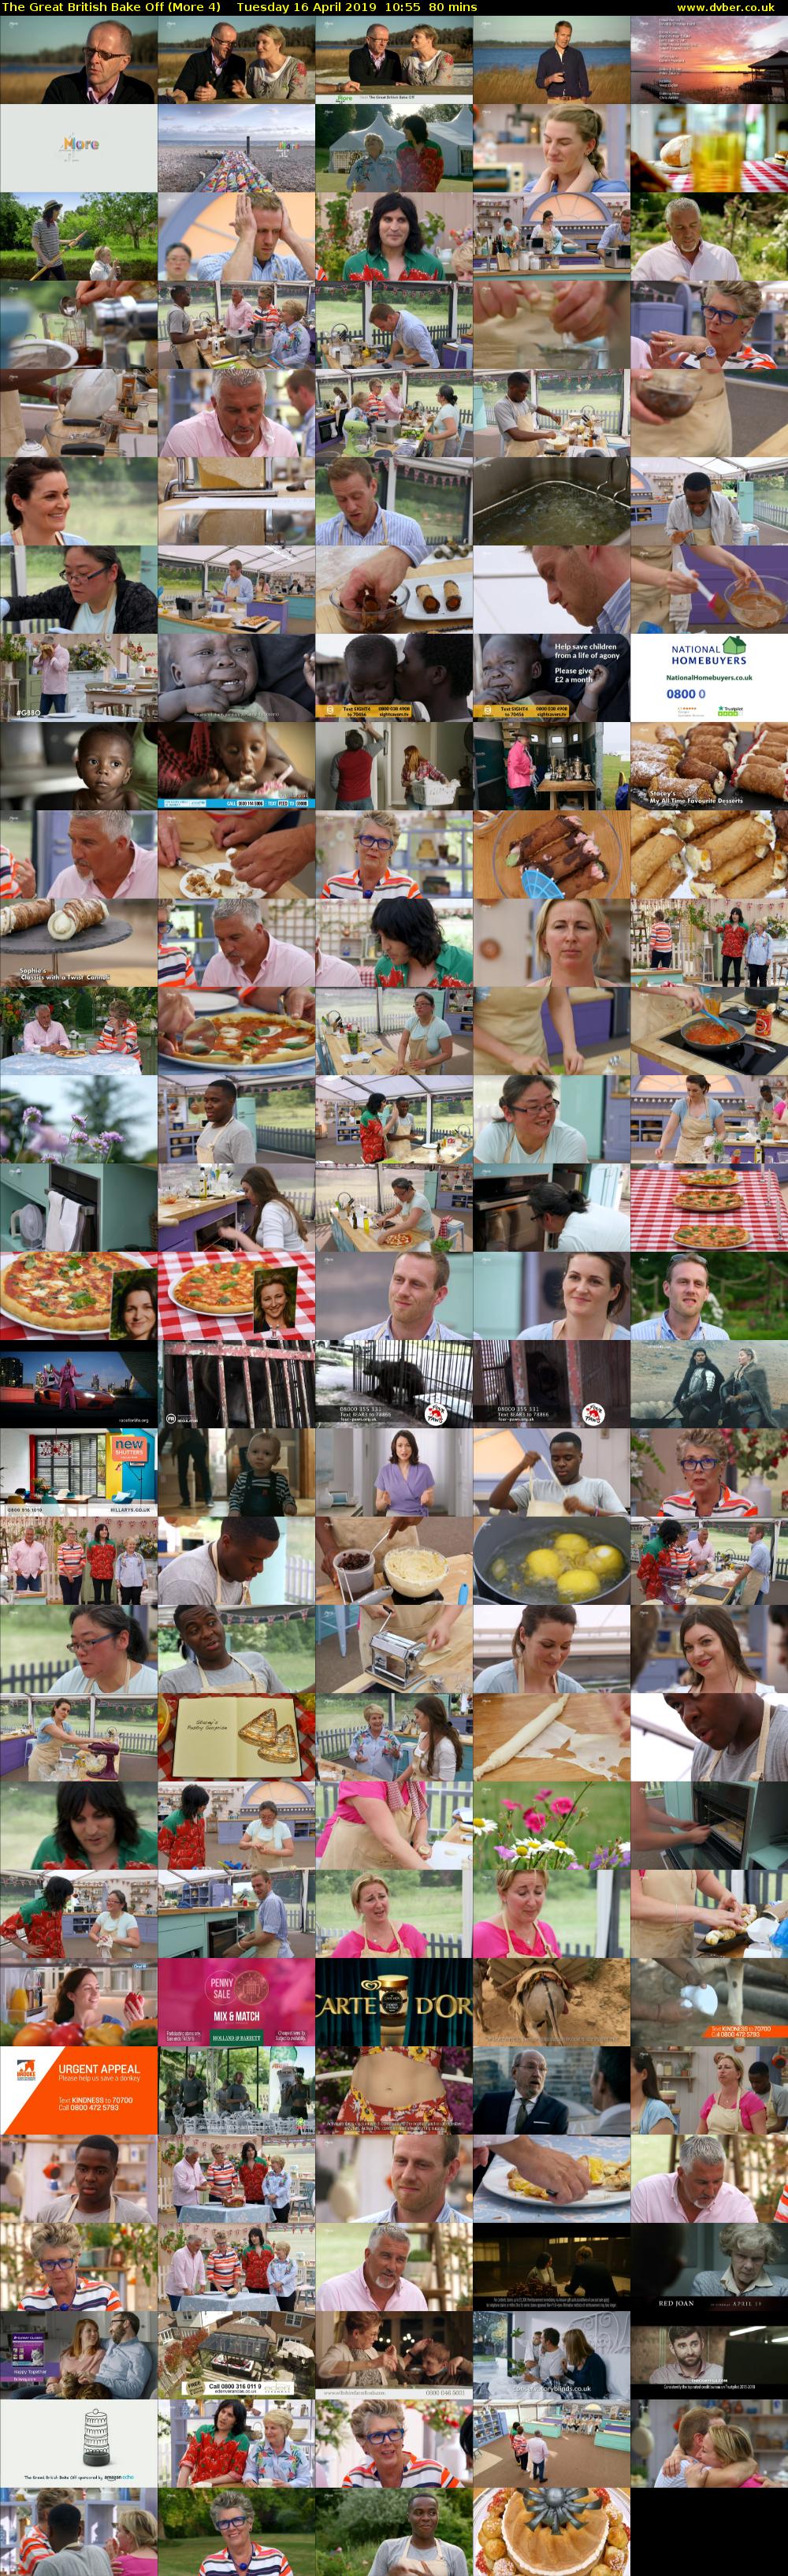 The Great British Bake Off (More 4) Tuesday 16 April 2019 10:55 - 12:15